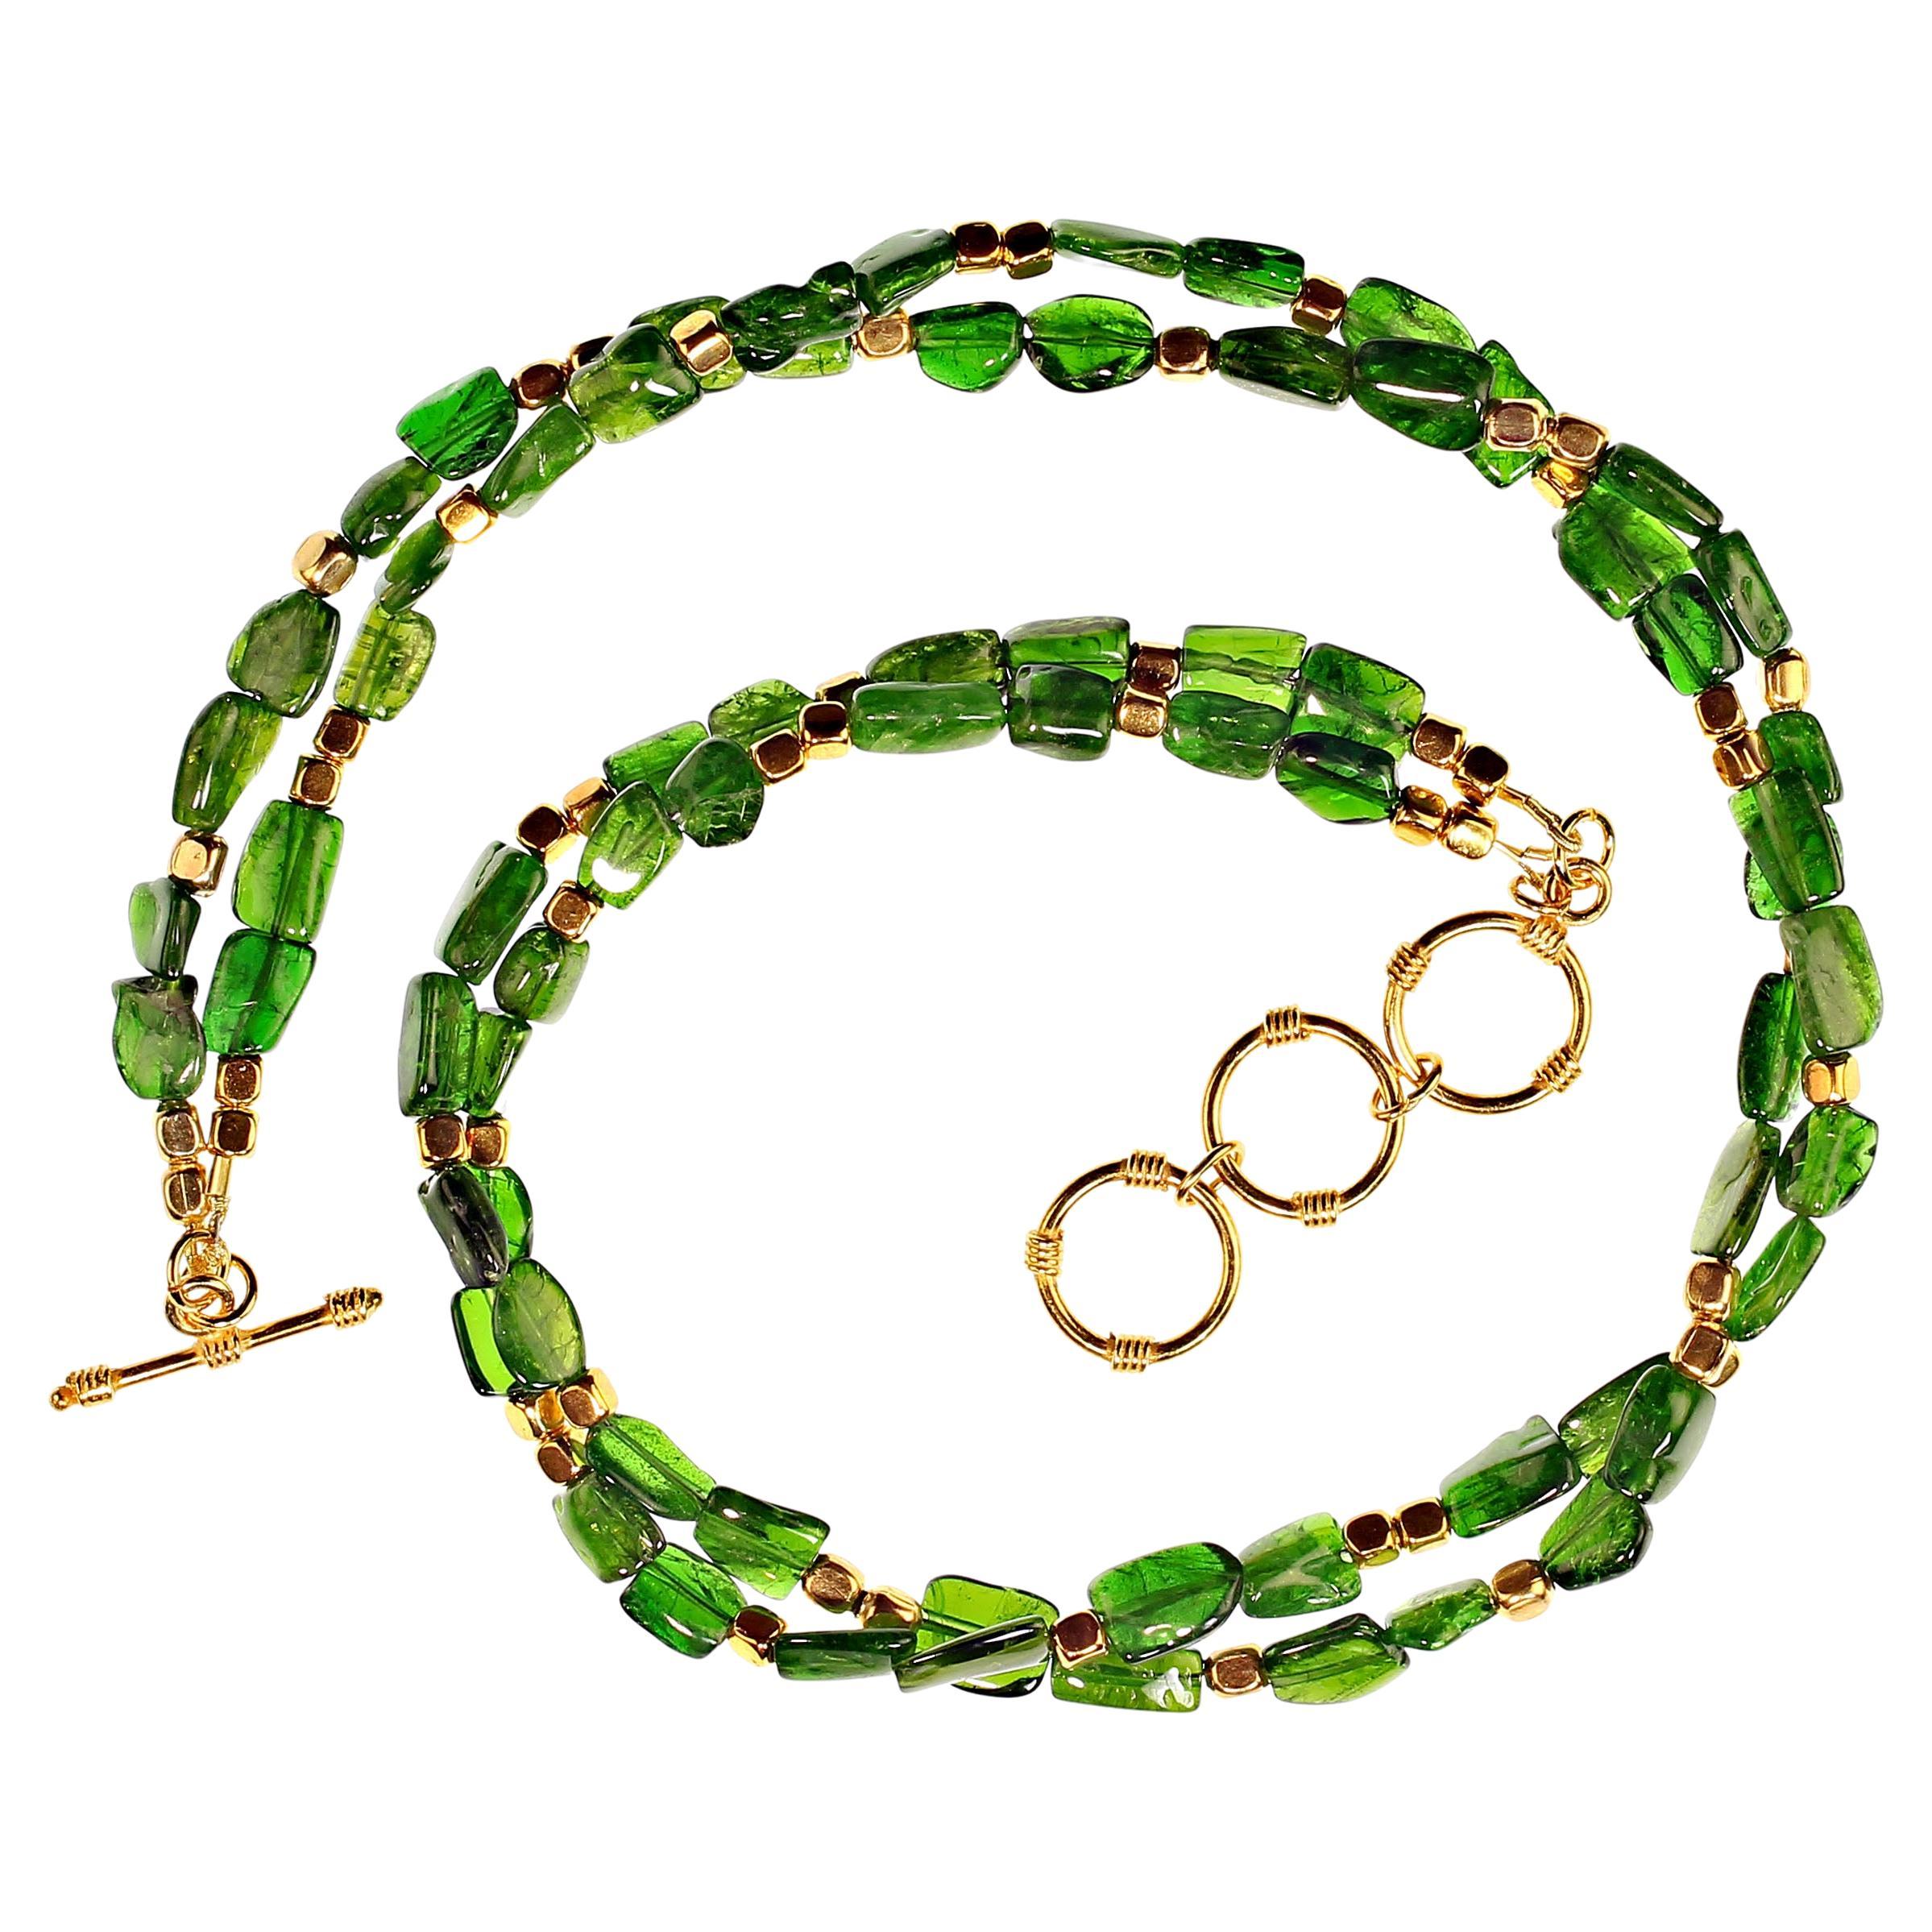 Bead AJD Brilliant Green Chrome Diopside Necklace with Goldy Accents  Great Gift! For Sale